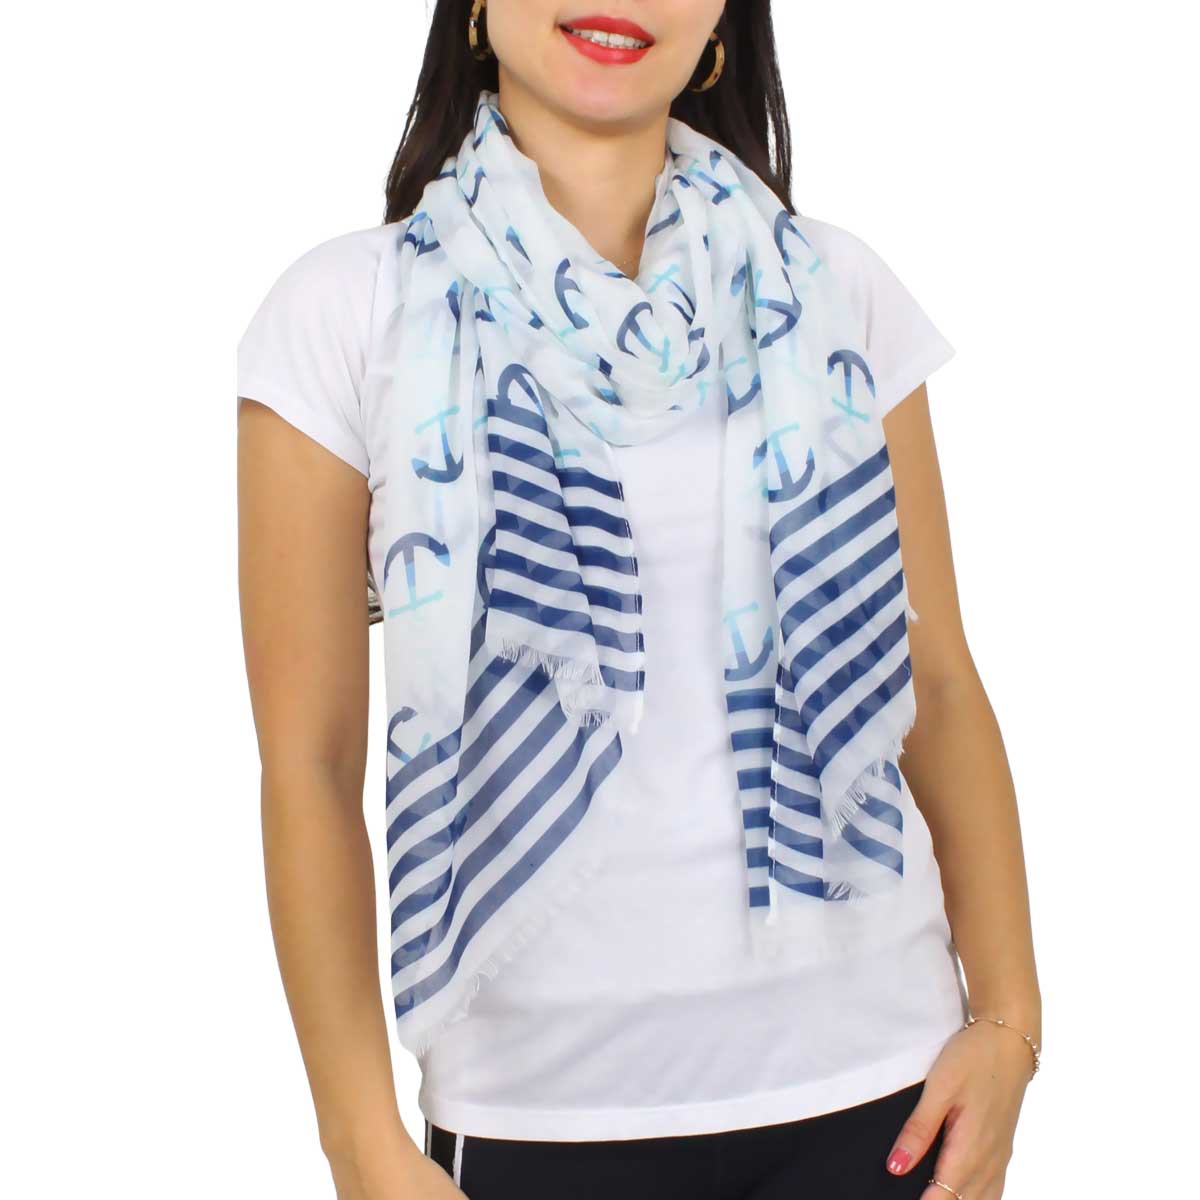 3111 - Nautical Print Scarves Oblong and Infinity 076 - Mint<br> Seahorse Print Scarf/Shawl - 